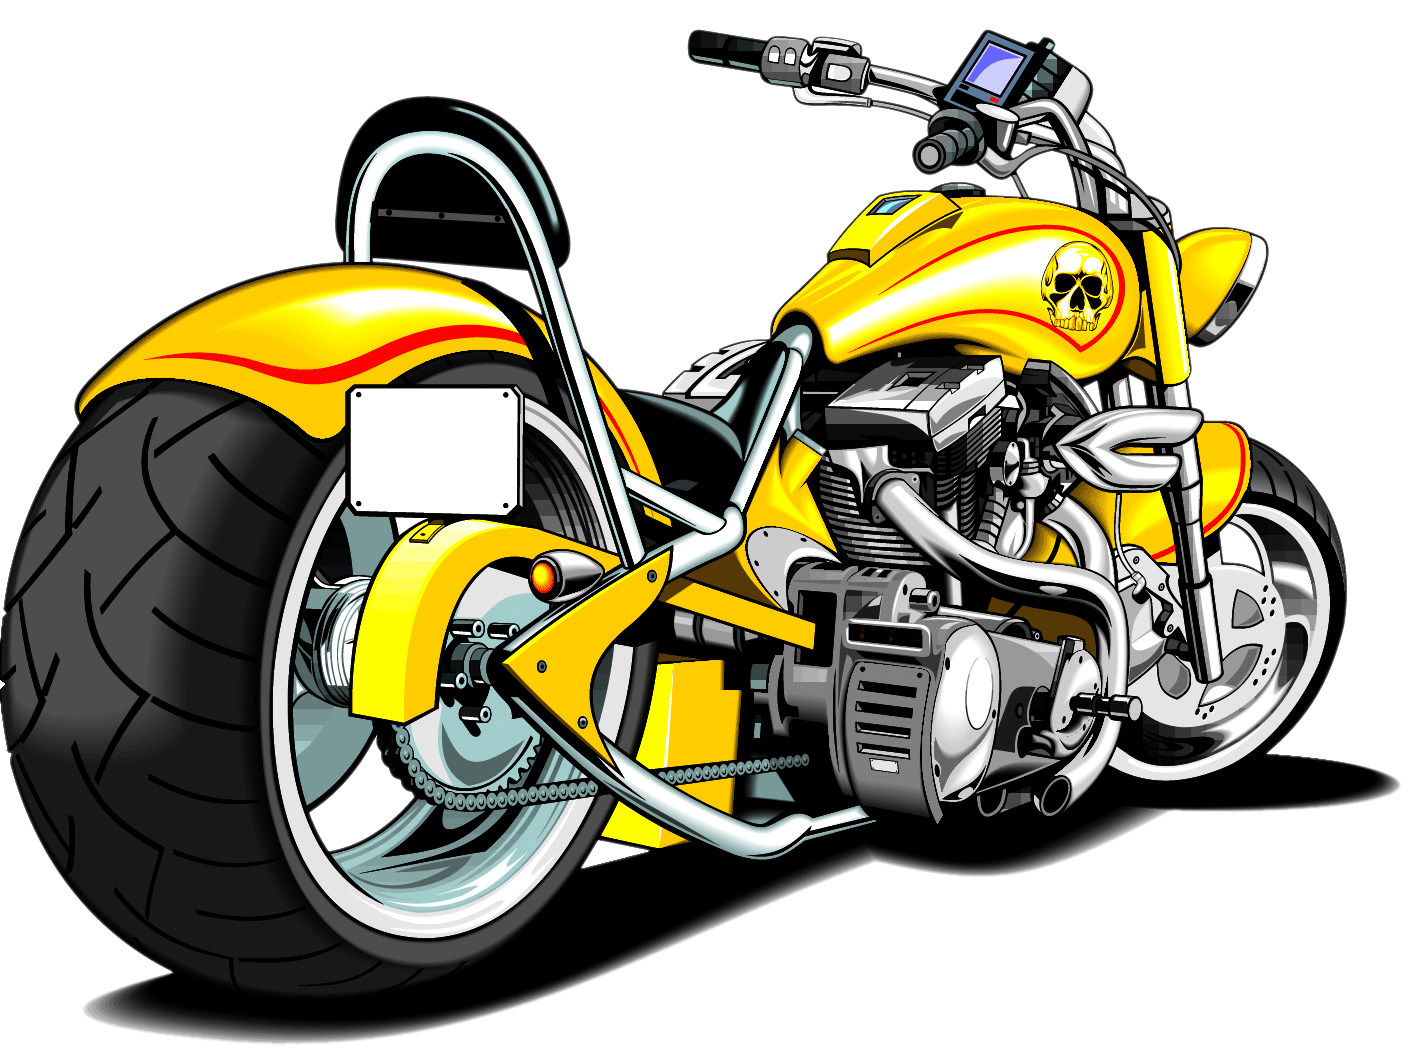 Harley motorcycle silhouette at. Cycle clipart motor